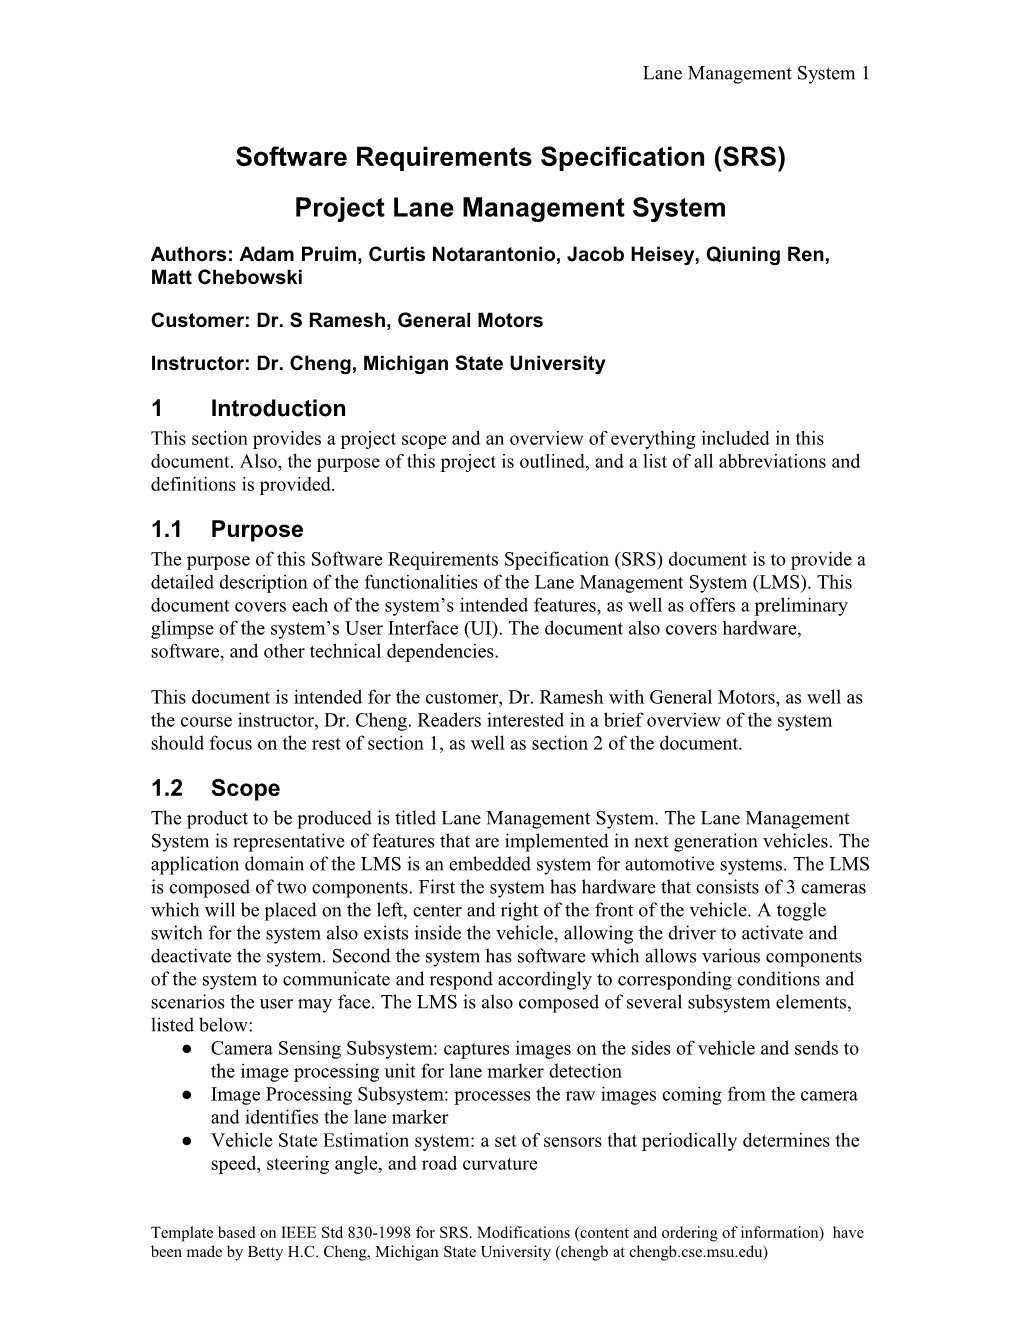 Software Requirements Specification (SRS)